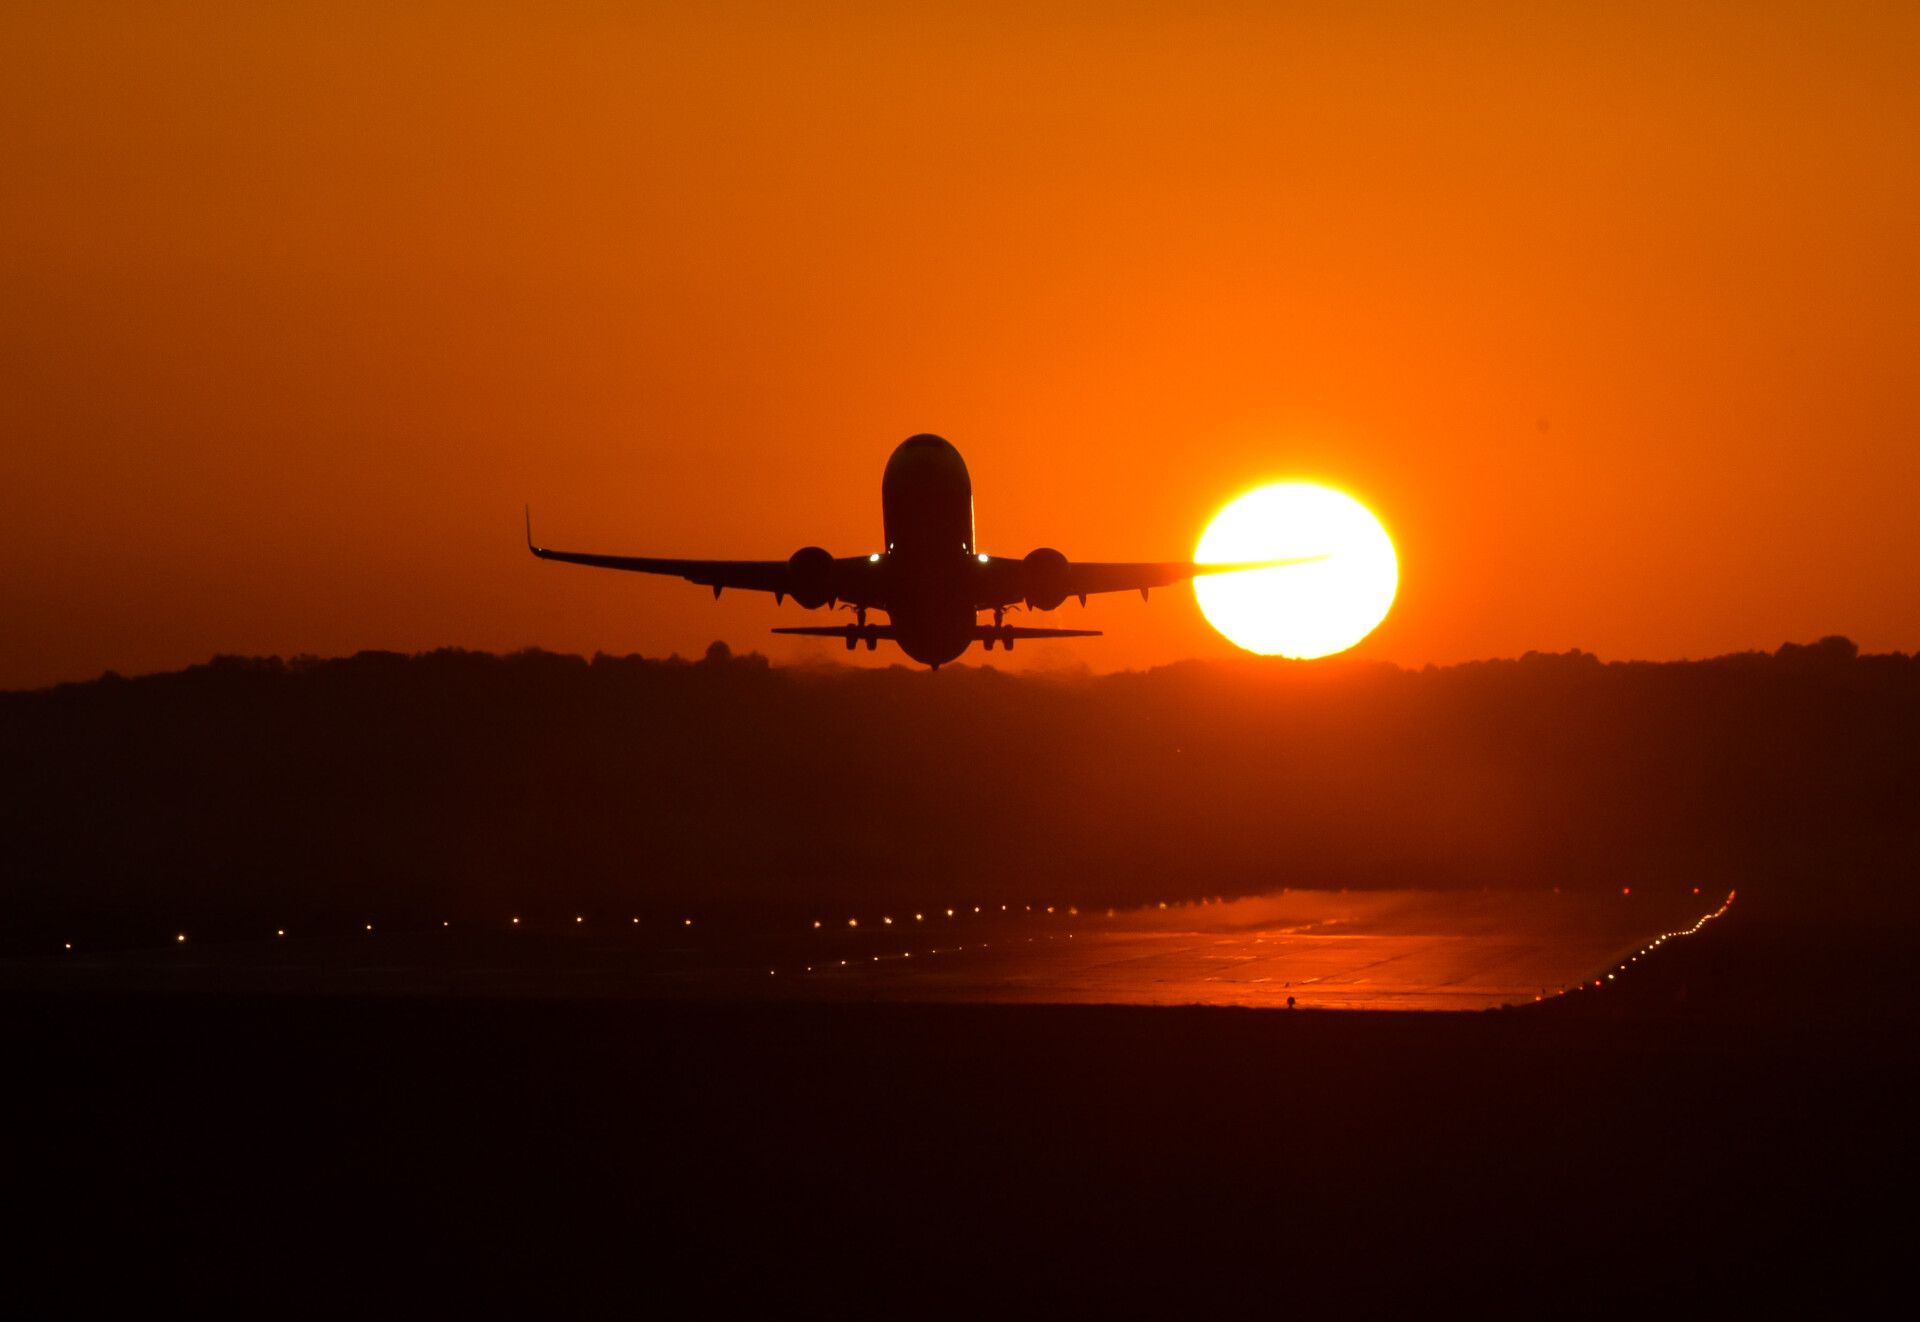 A plane seen taking off during sunset at Krakow's Balice